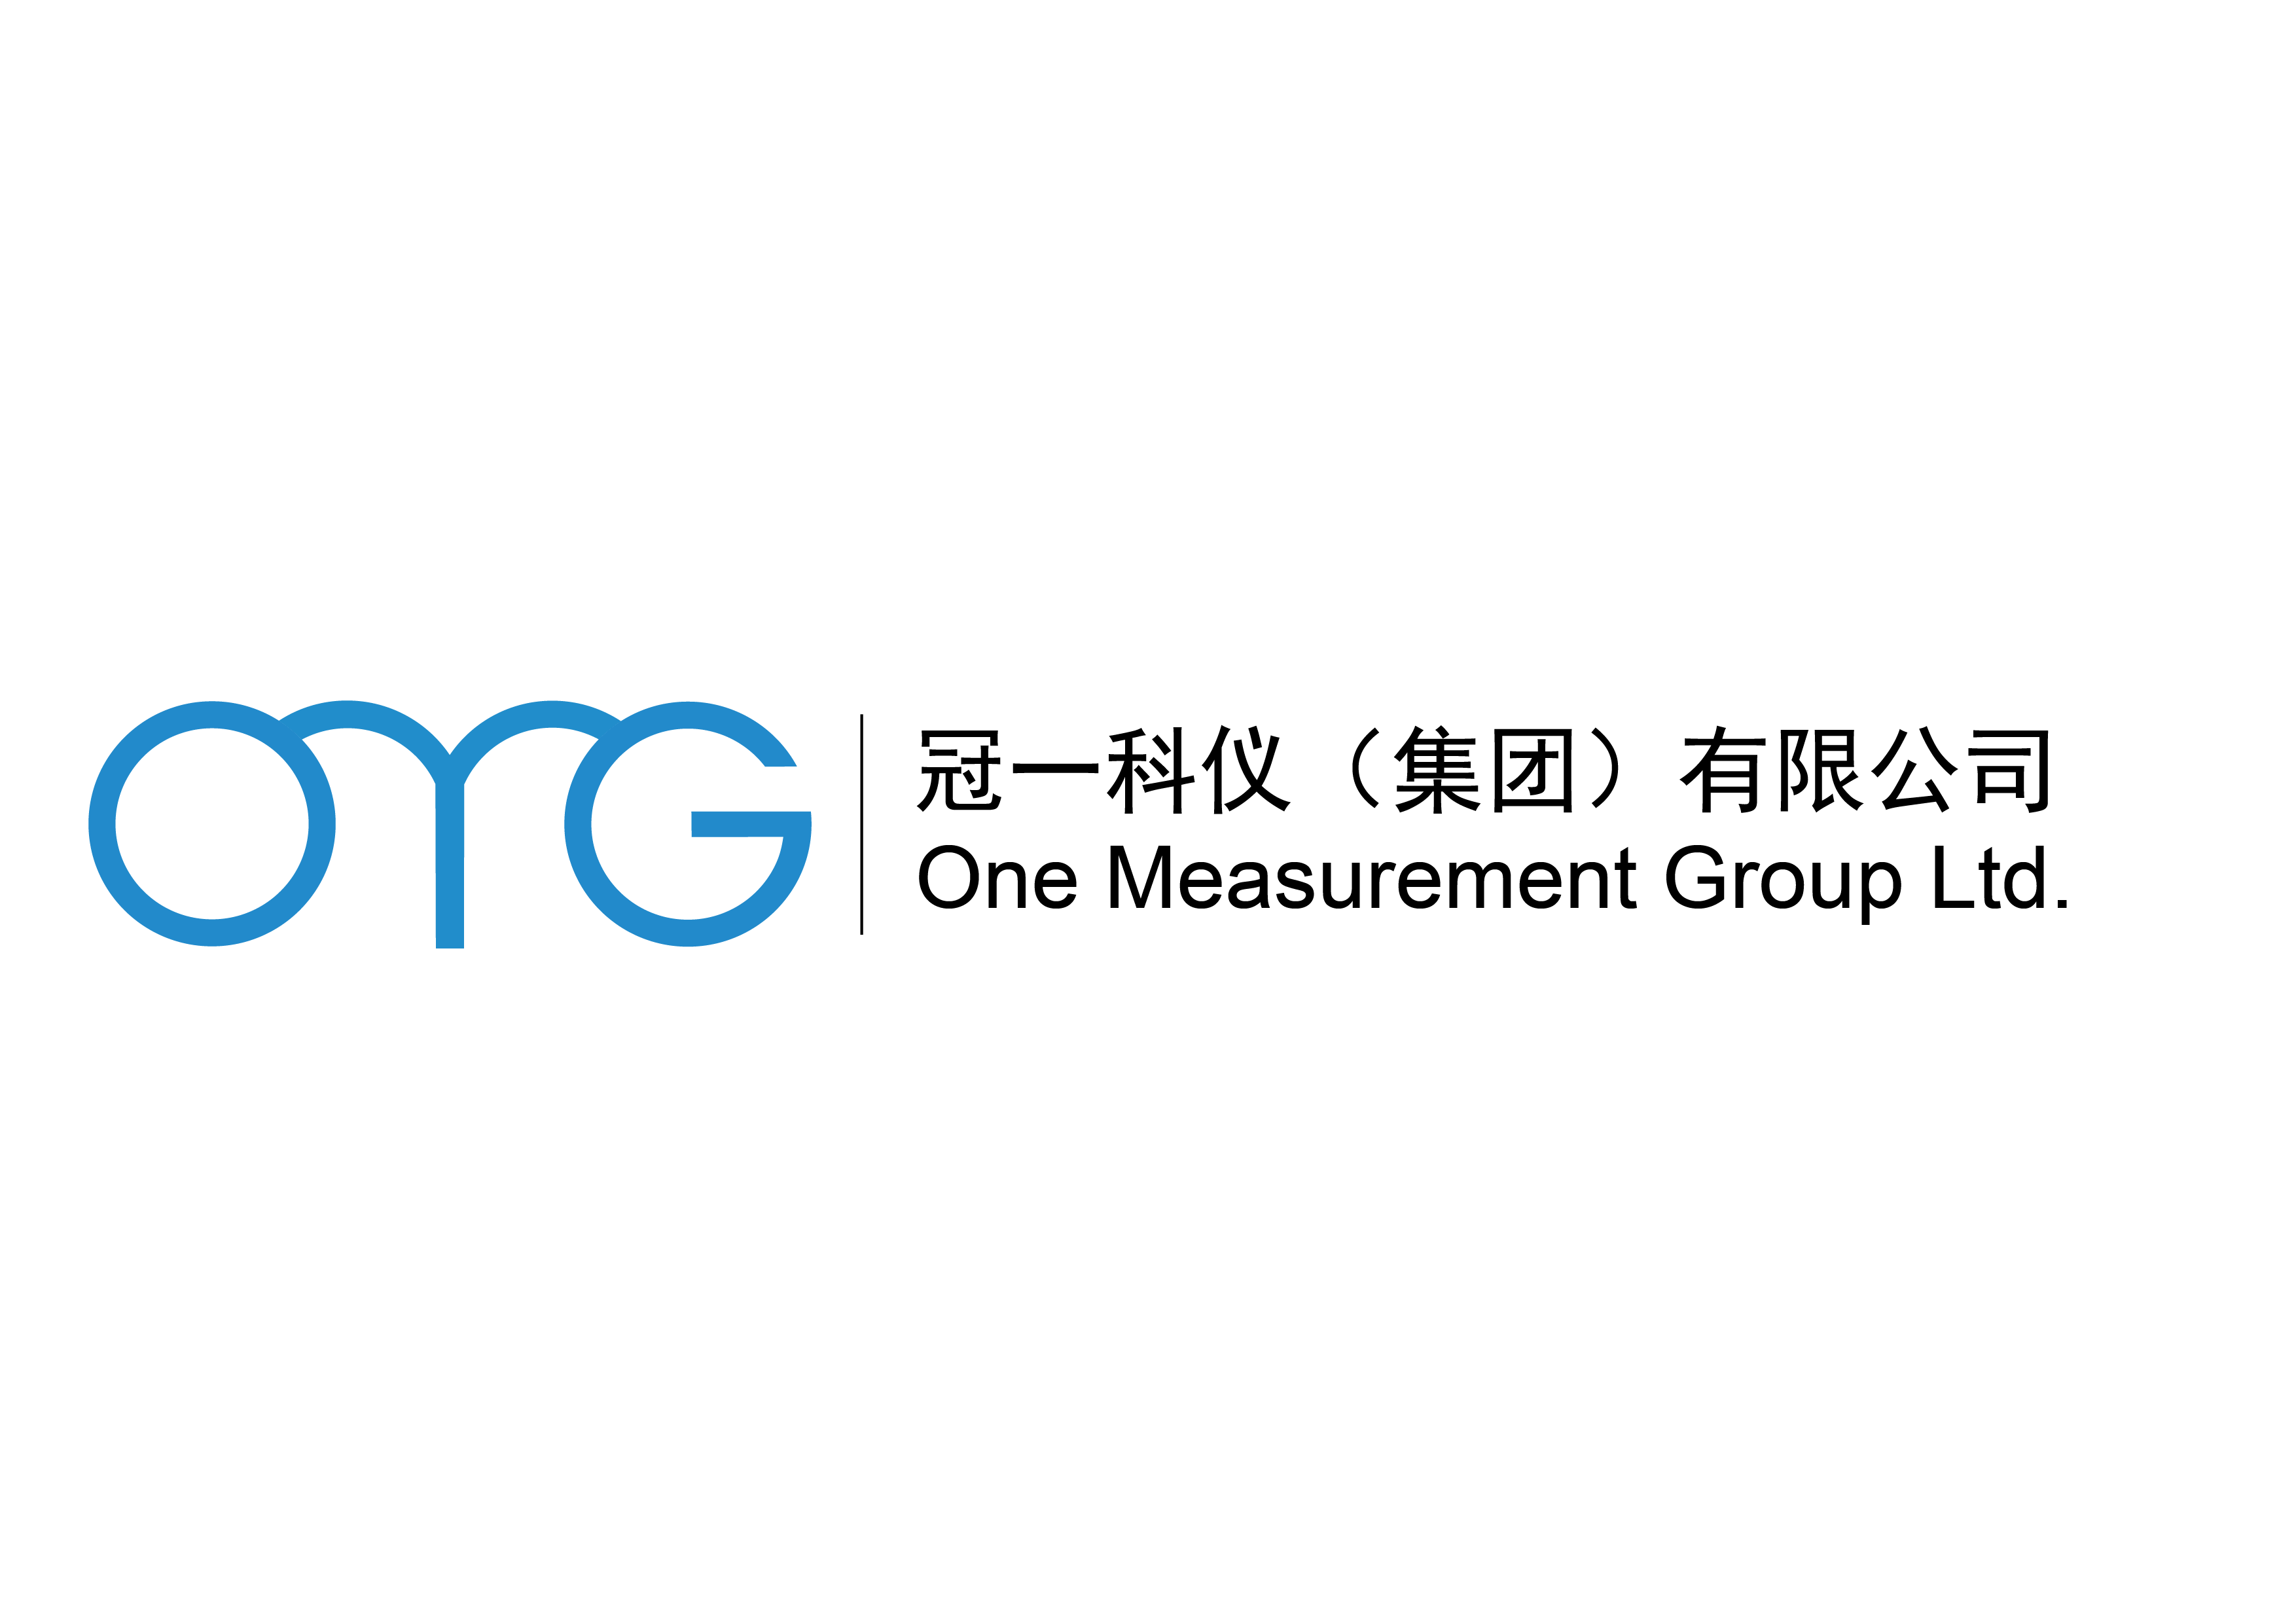 ONE MEASUREMENT GROUP LIMITED